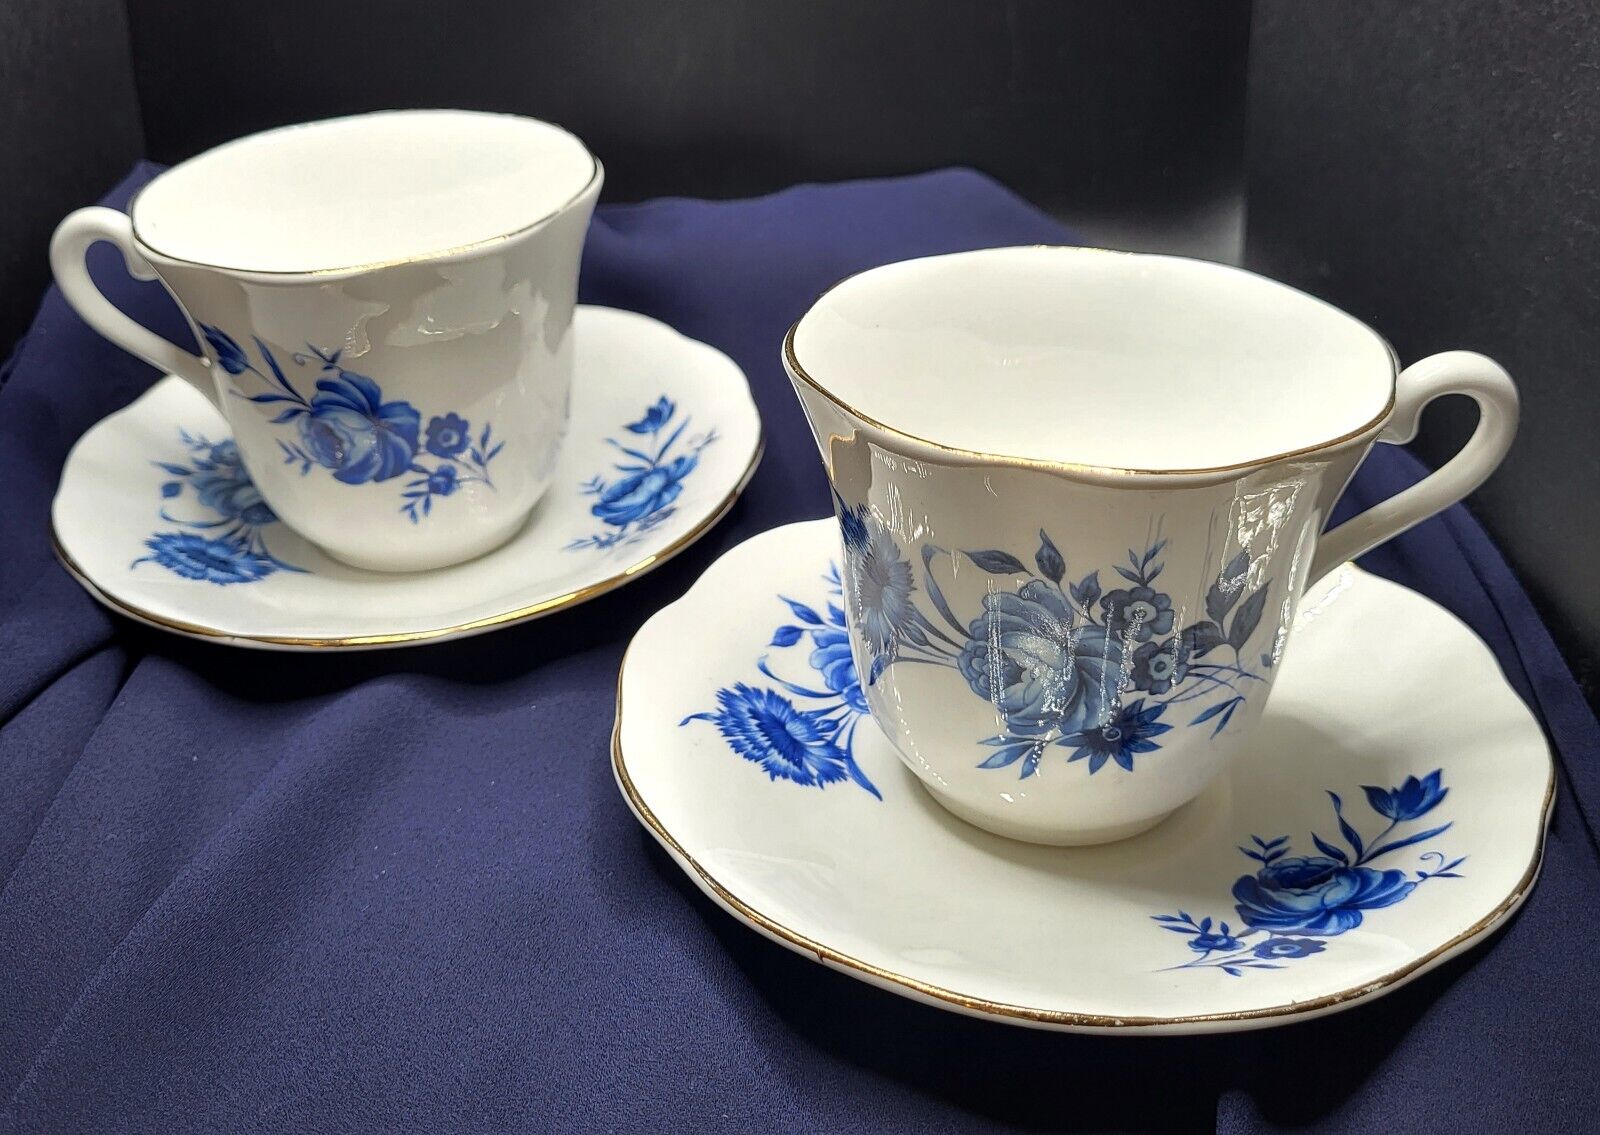 Lot of 2 Elizabethan China By Taylor & Kent England Tea Cup & Saucer Blue Rose